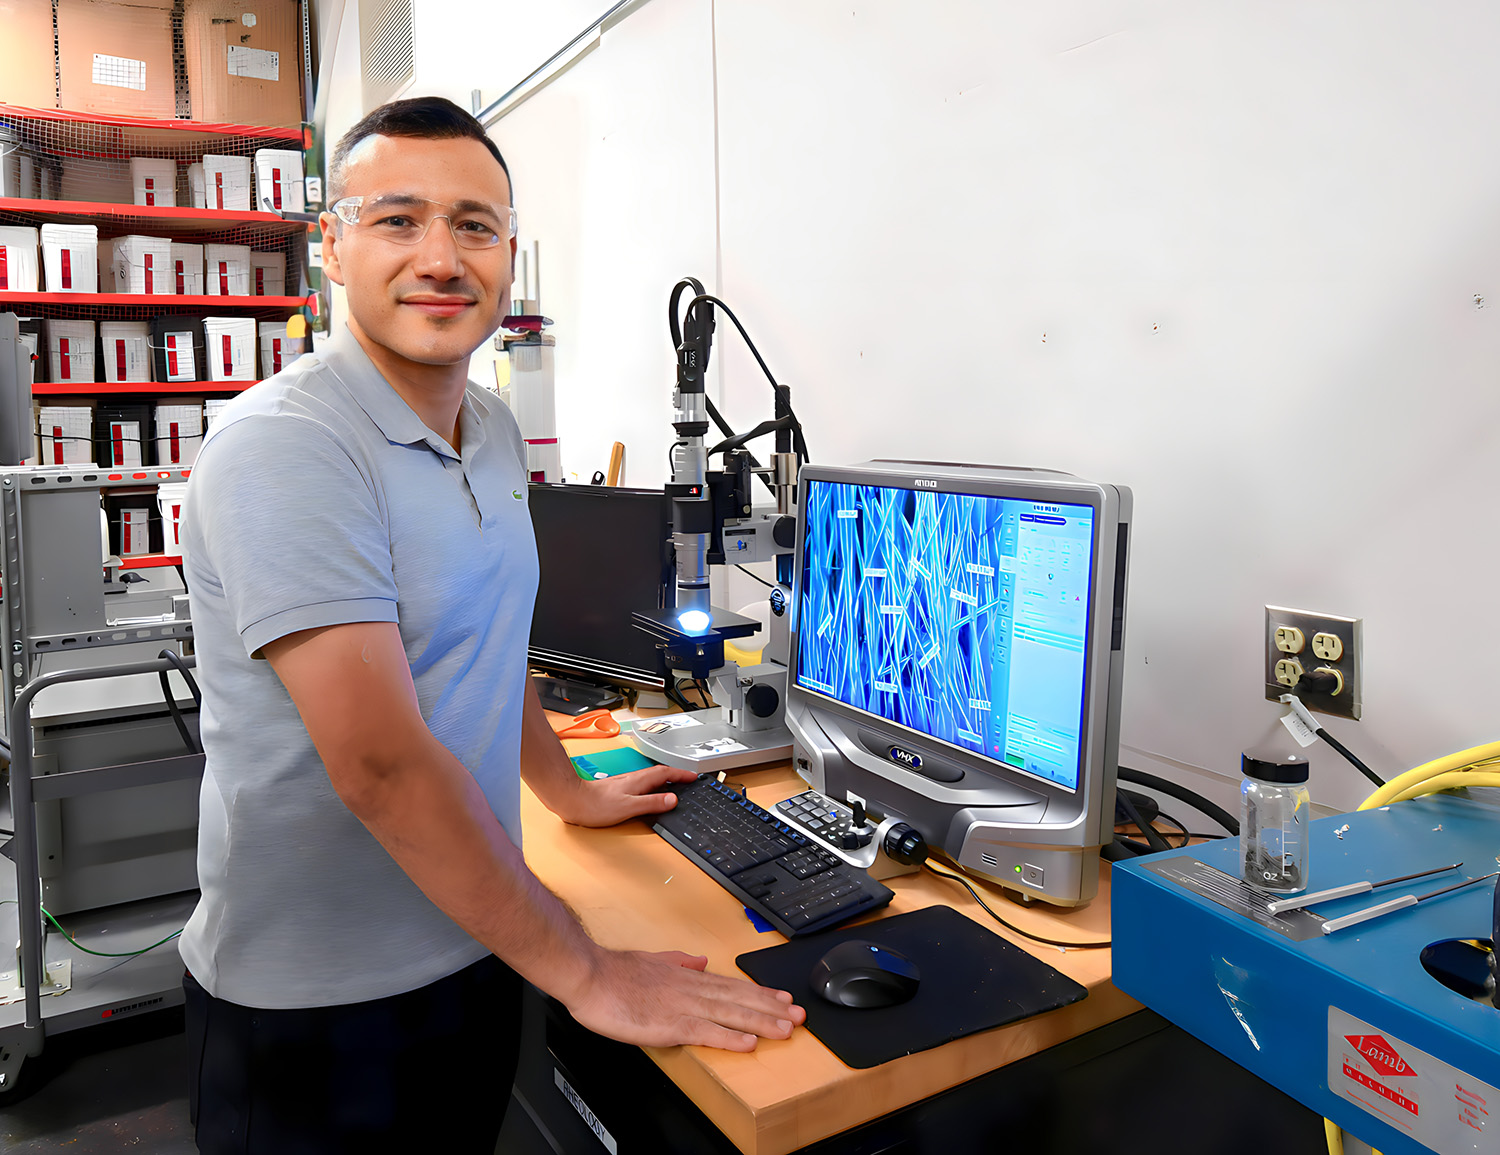 Mehmet Dasdemir, Ph.D., NWI's director of product development, evaluates nonwoven materials using the high-powered Keyence digital microscope in NWI's Fiber and Polymer Science Lab.